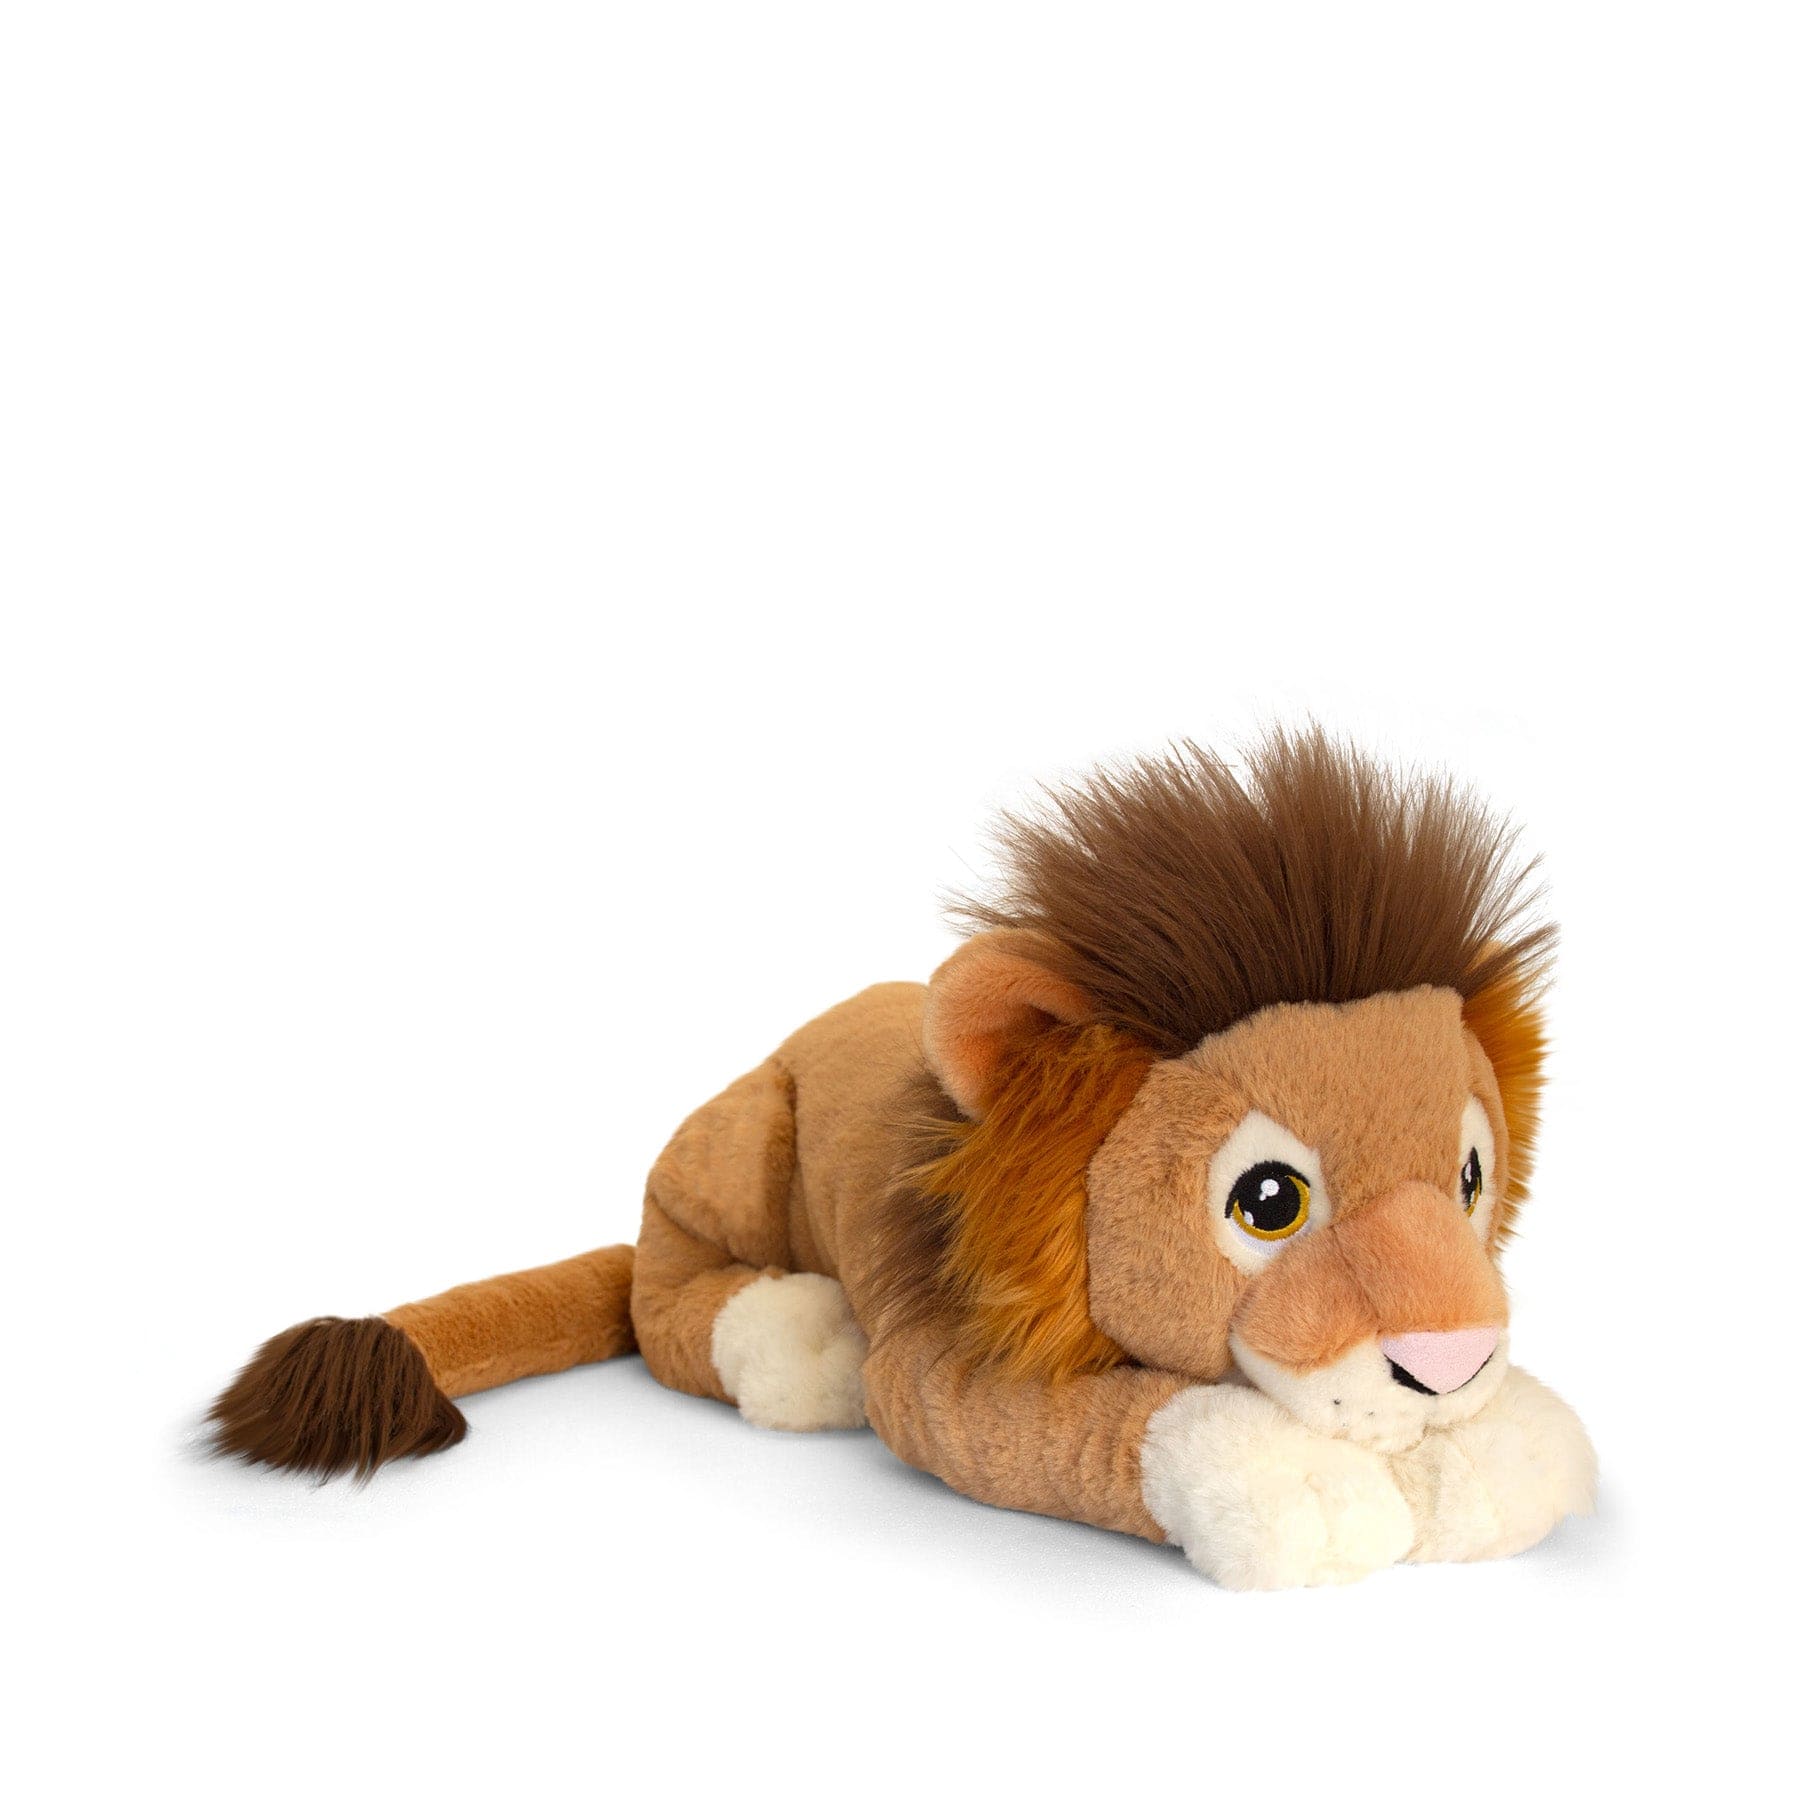 Plush lion toy lying down with fluffy mane on white background